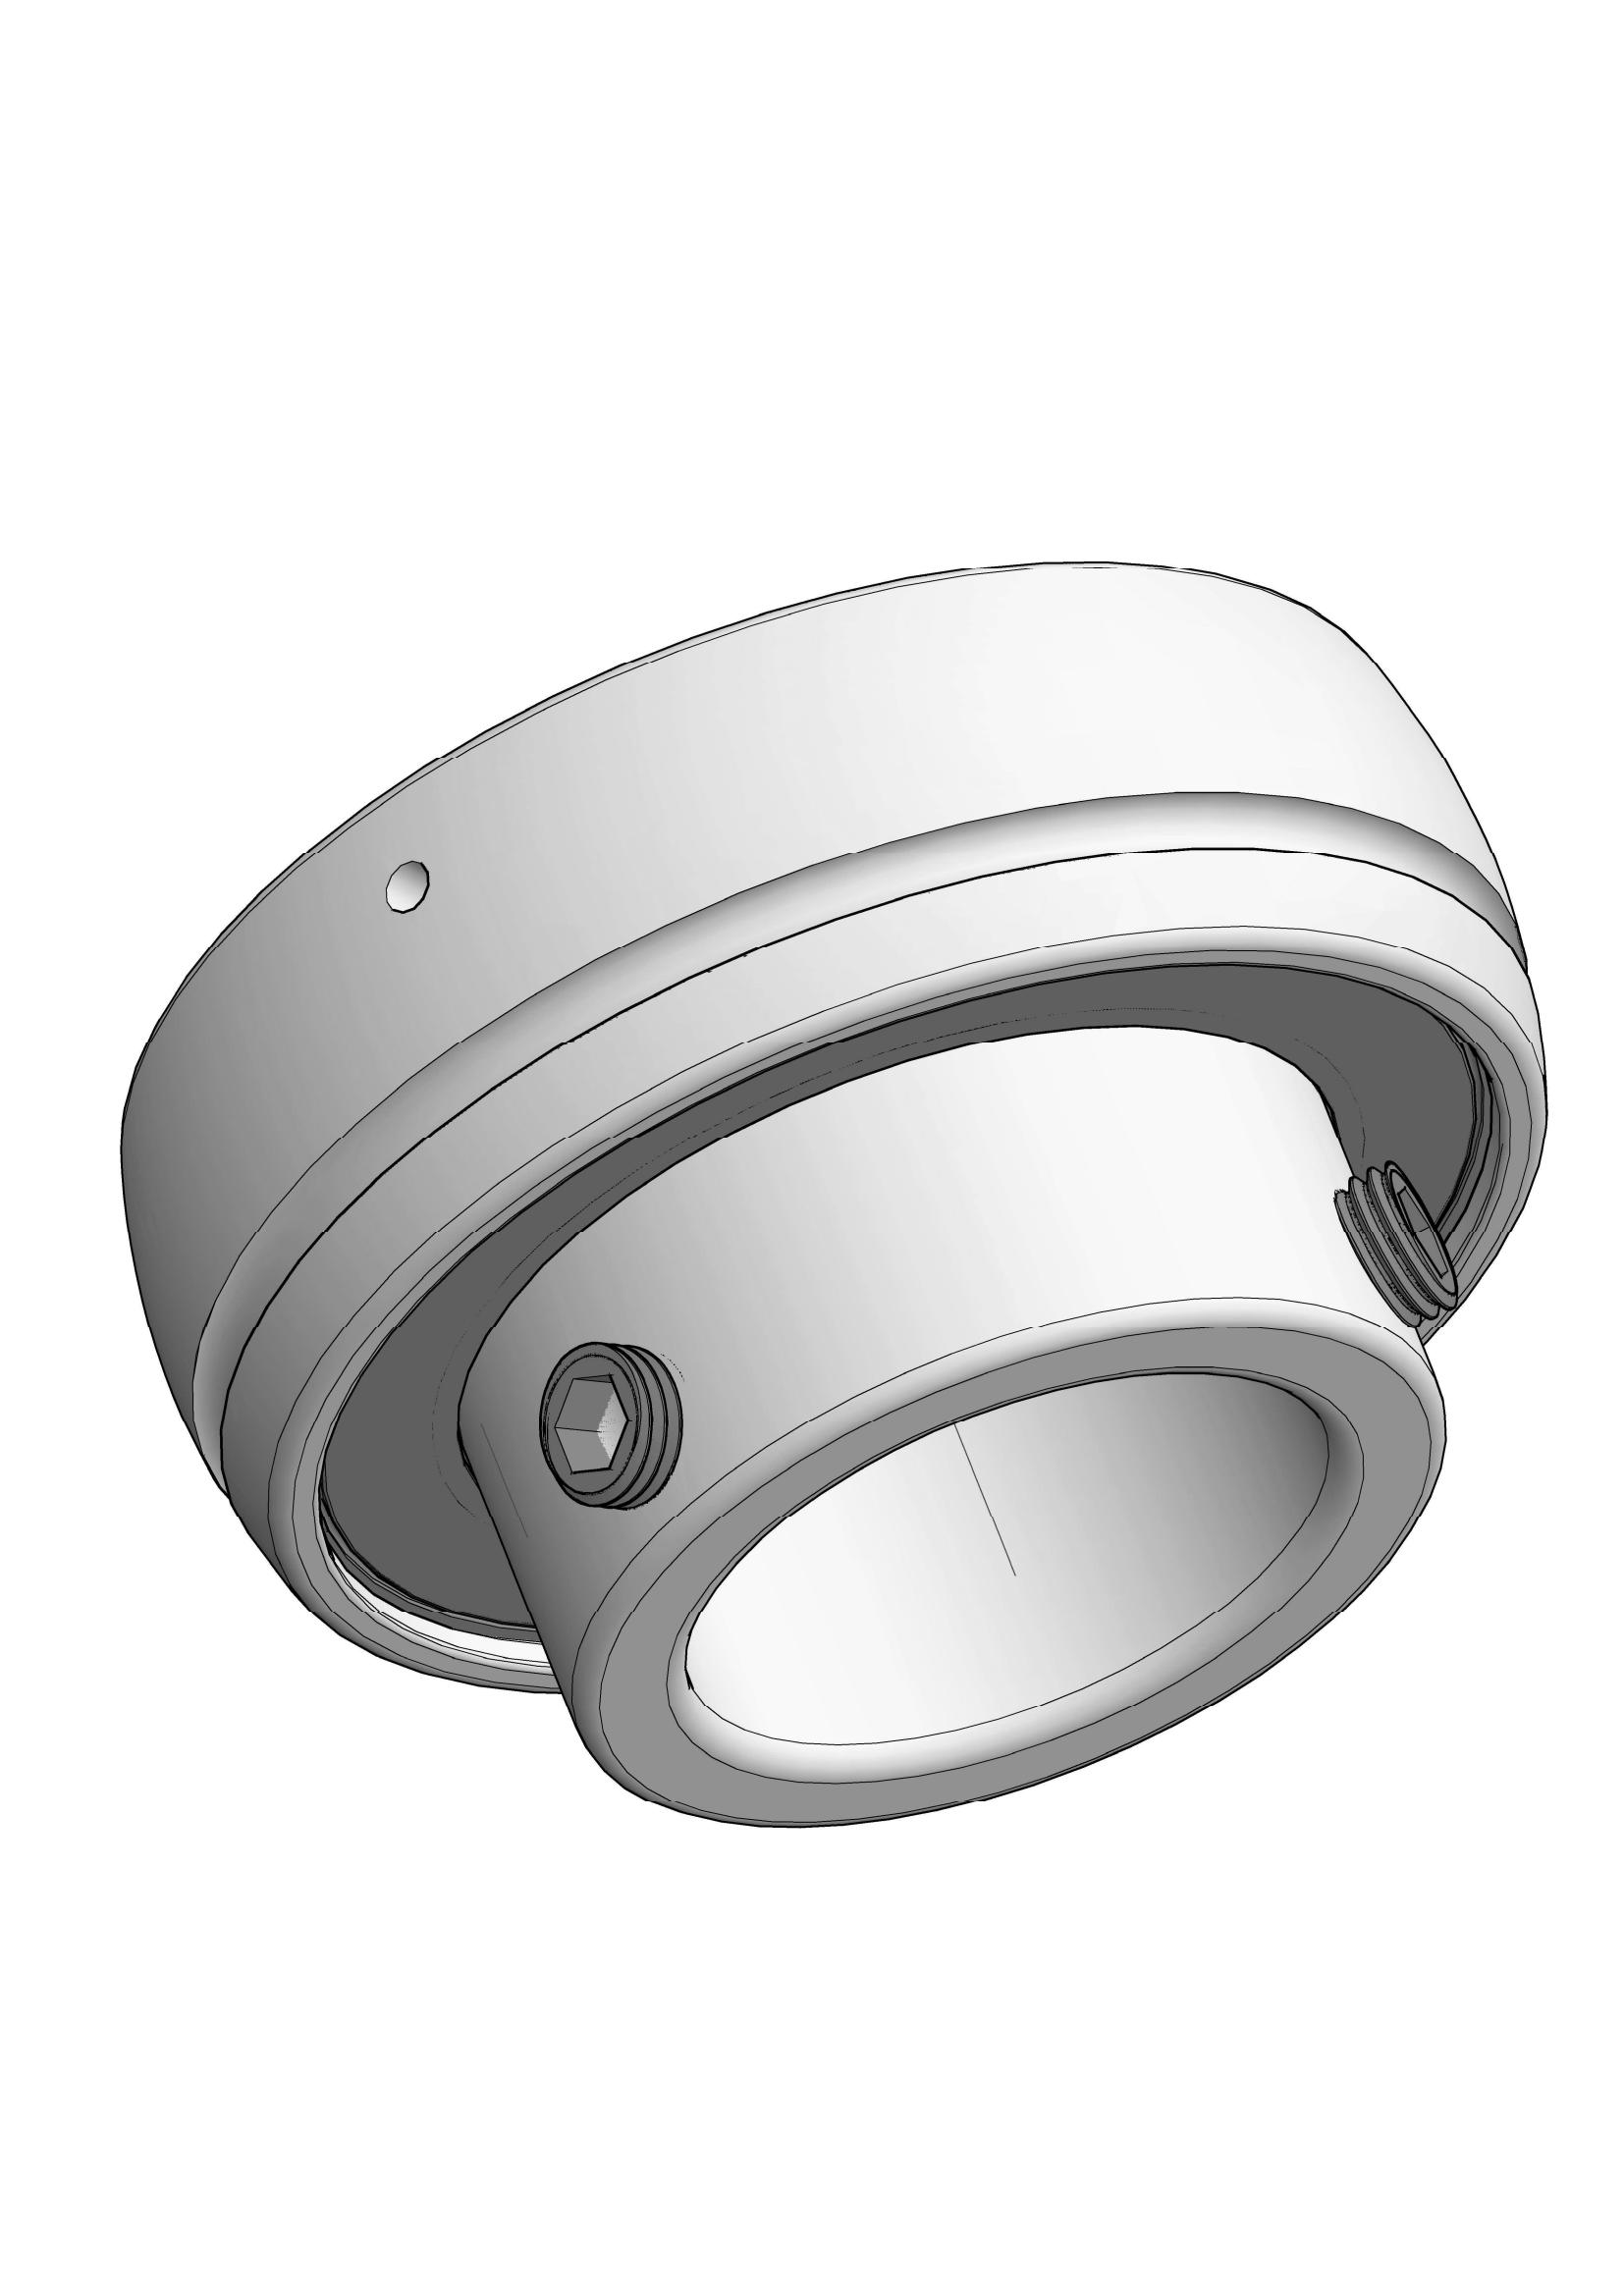 SB206-17 insert ball bearings with Eccentric Collar Lock with 1-1/16 inch Bore